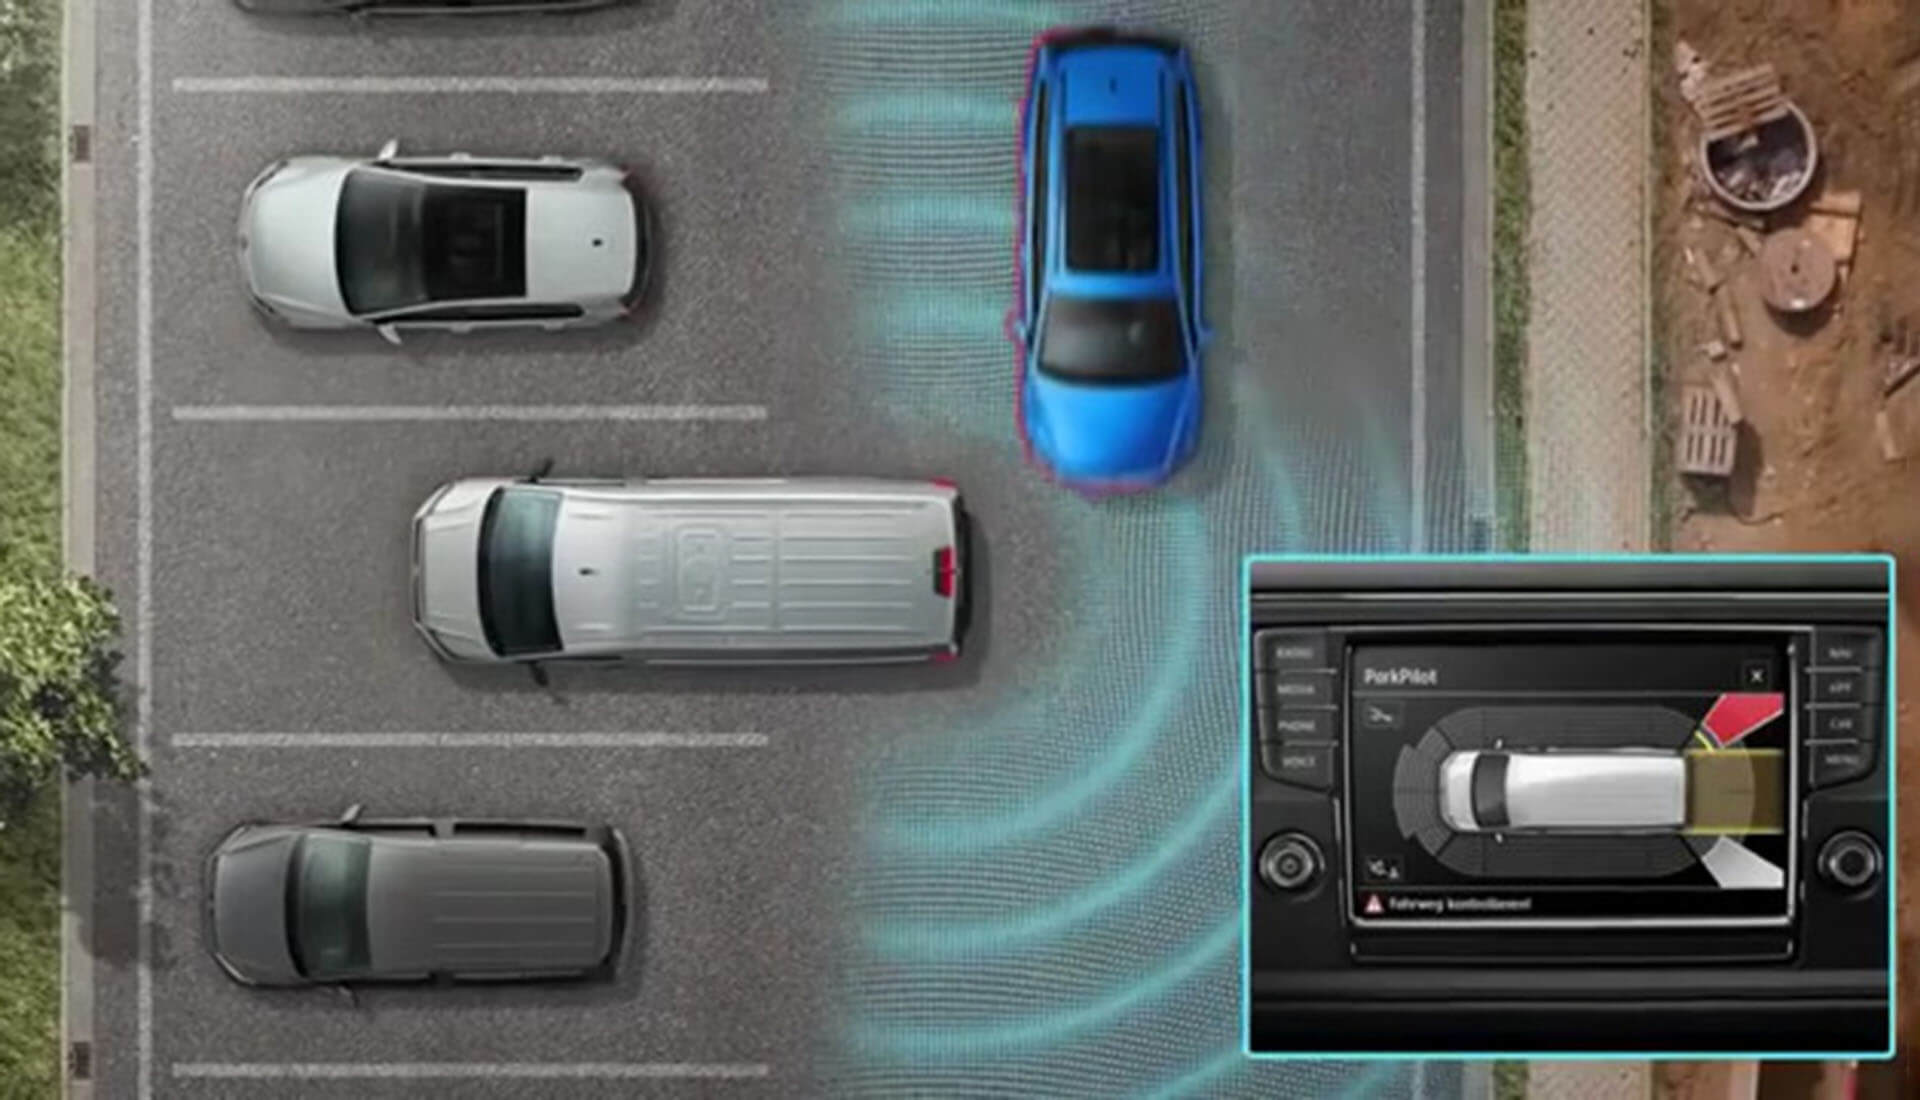 Park Assist Fits in when it needs to Image